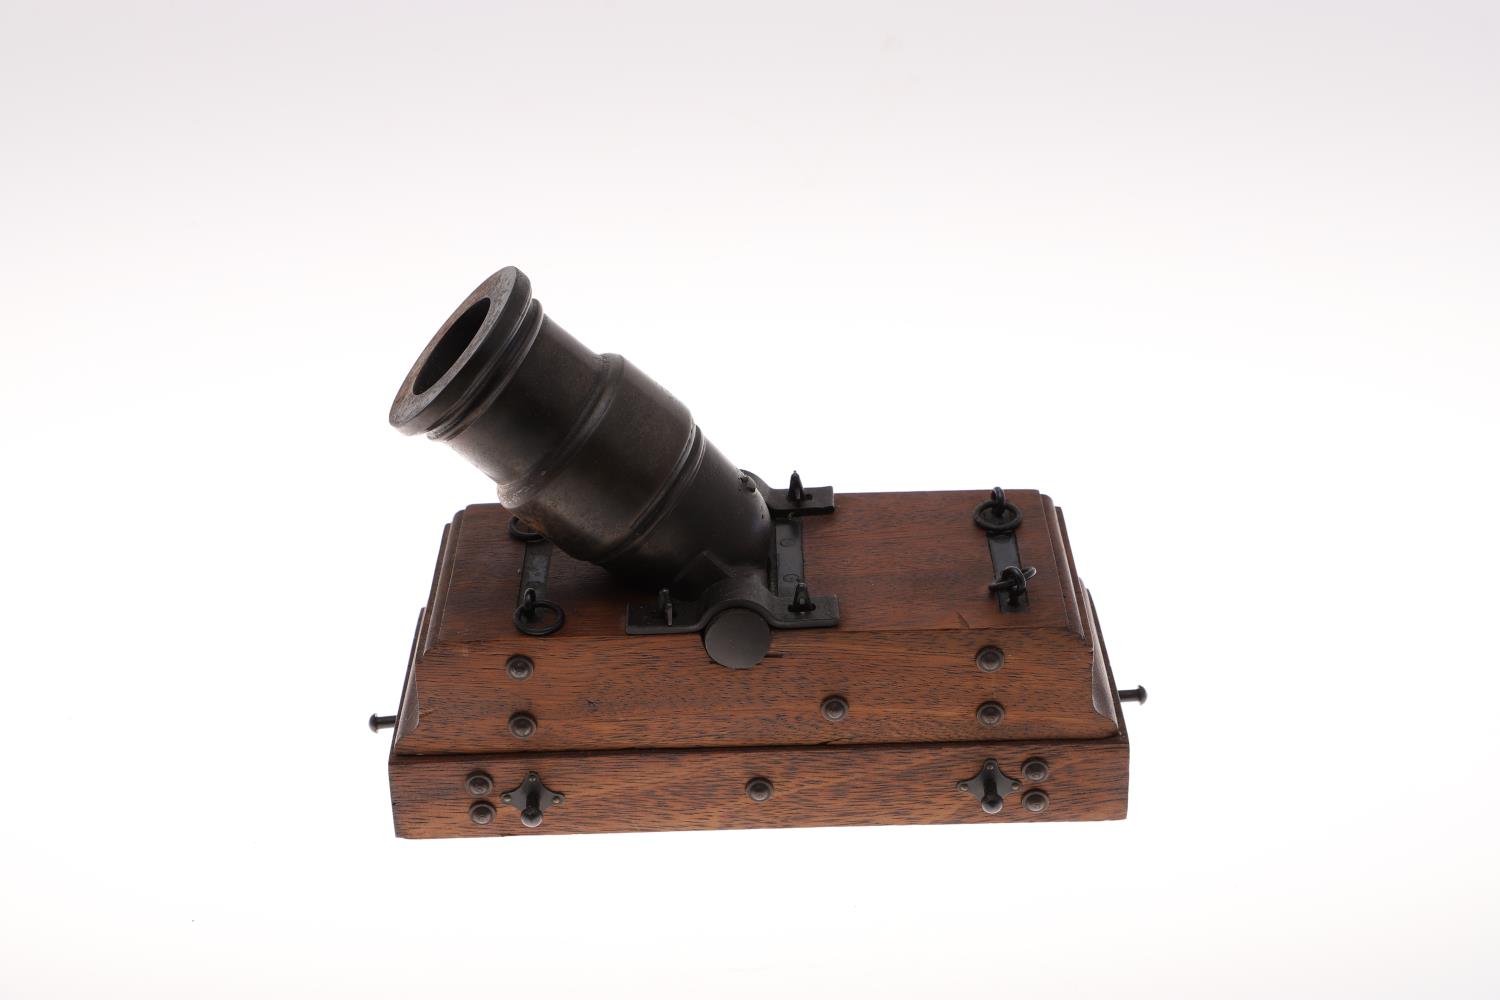 A MODEL OF A 19TH CENTURY TEN OR THIRTEEN INCH MORTAR ON WOODEN BED. - Image 3 of 5